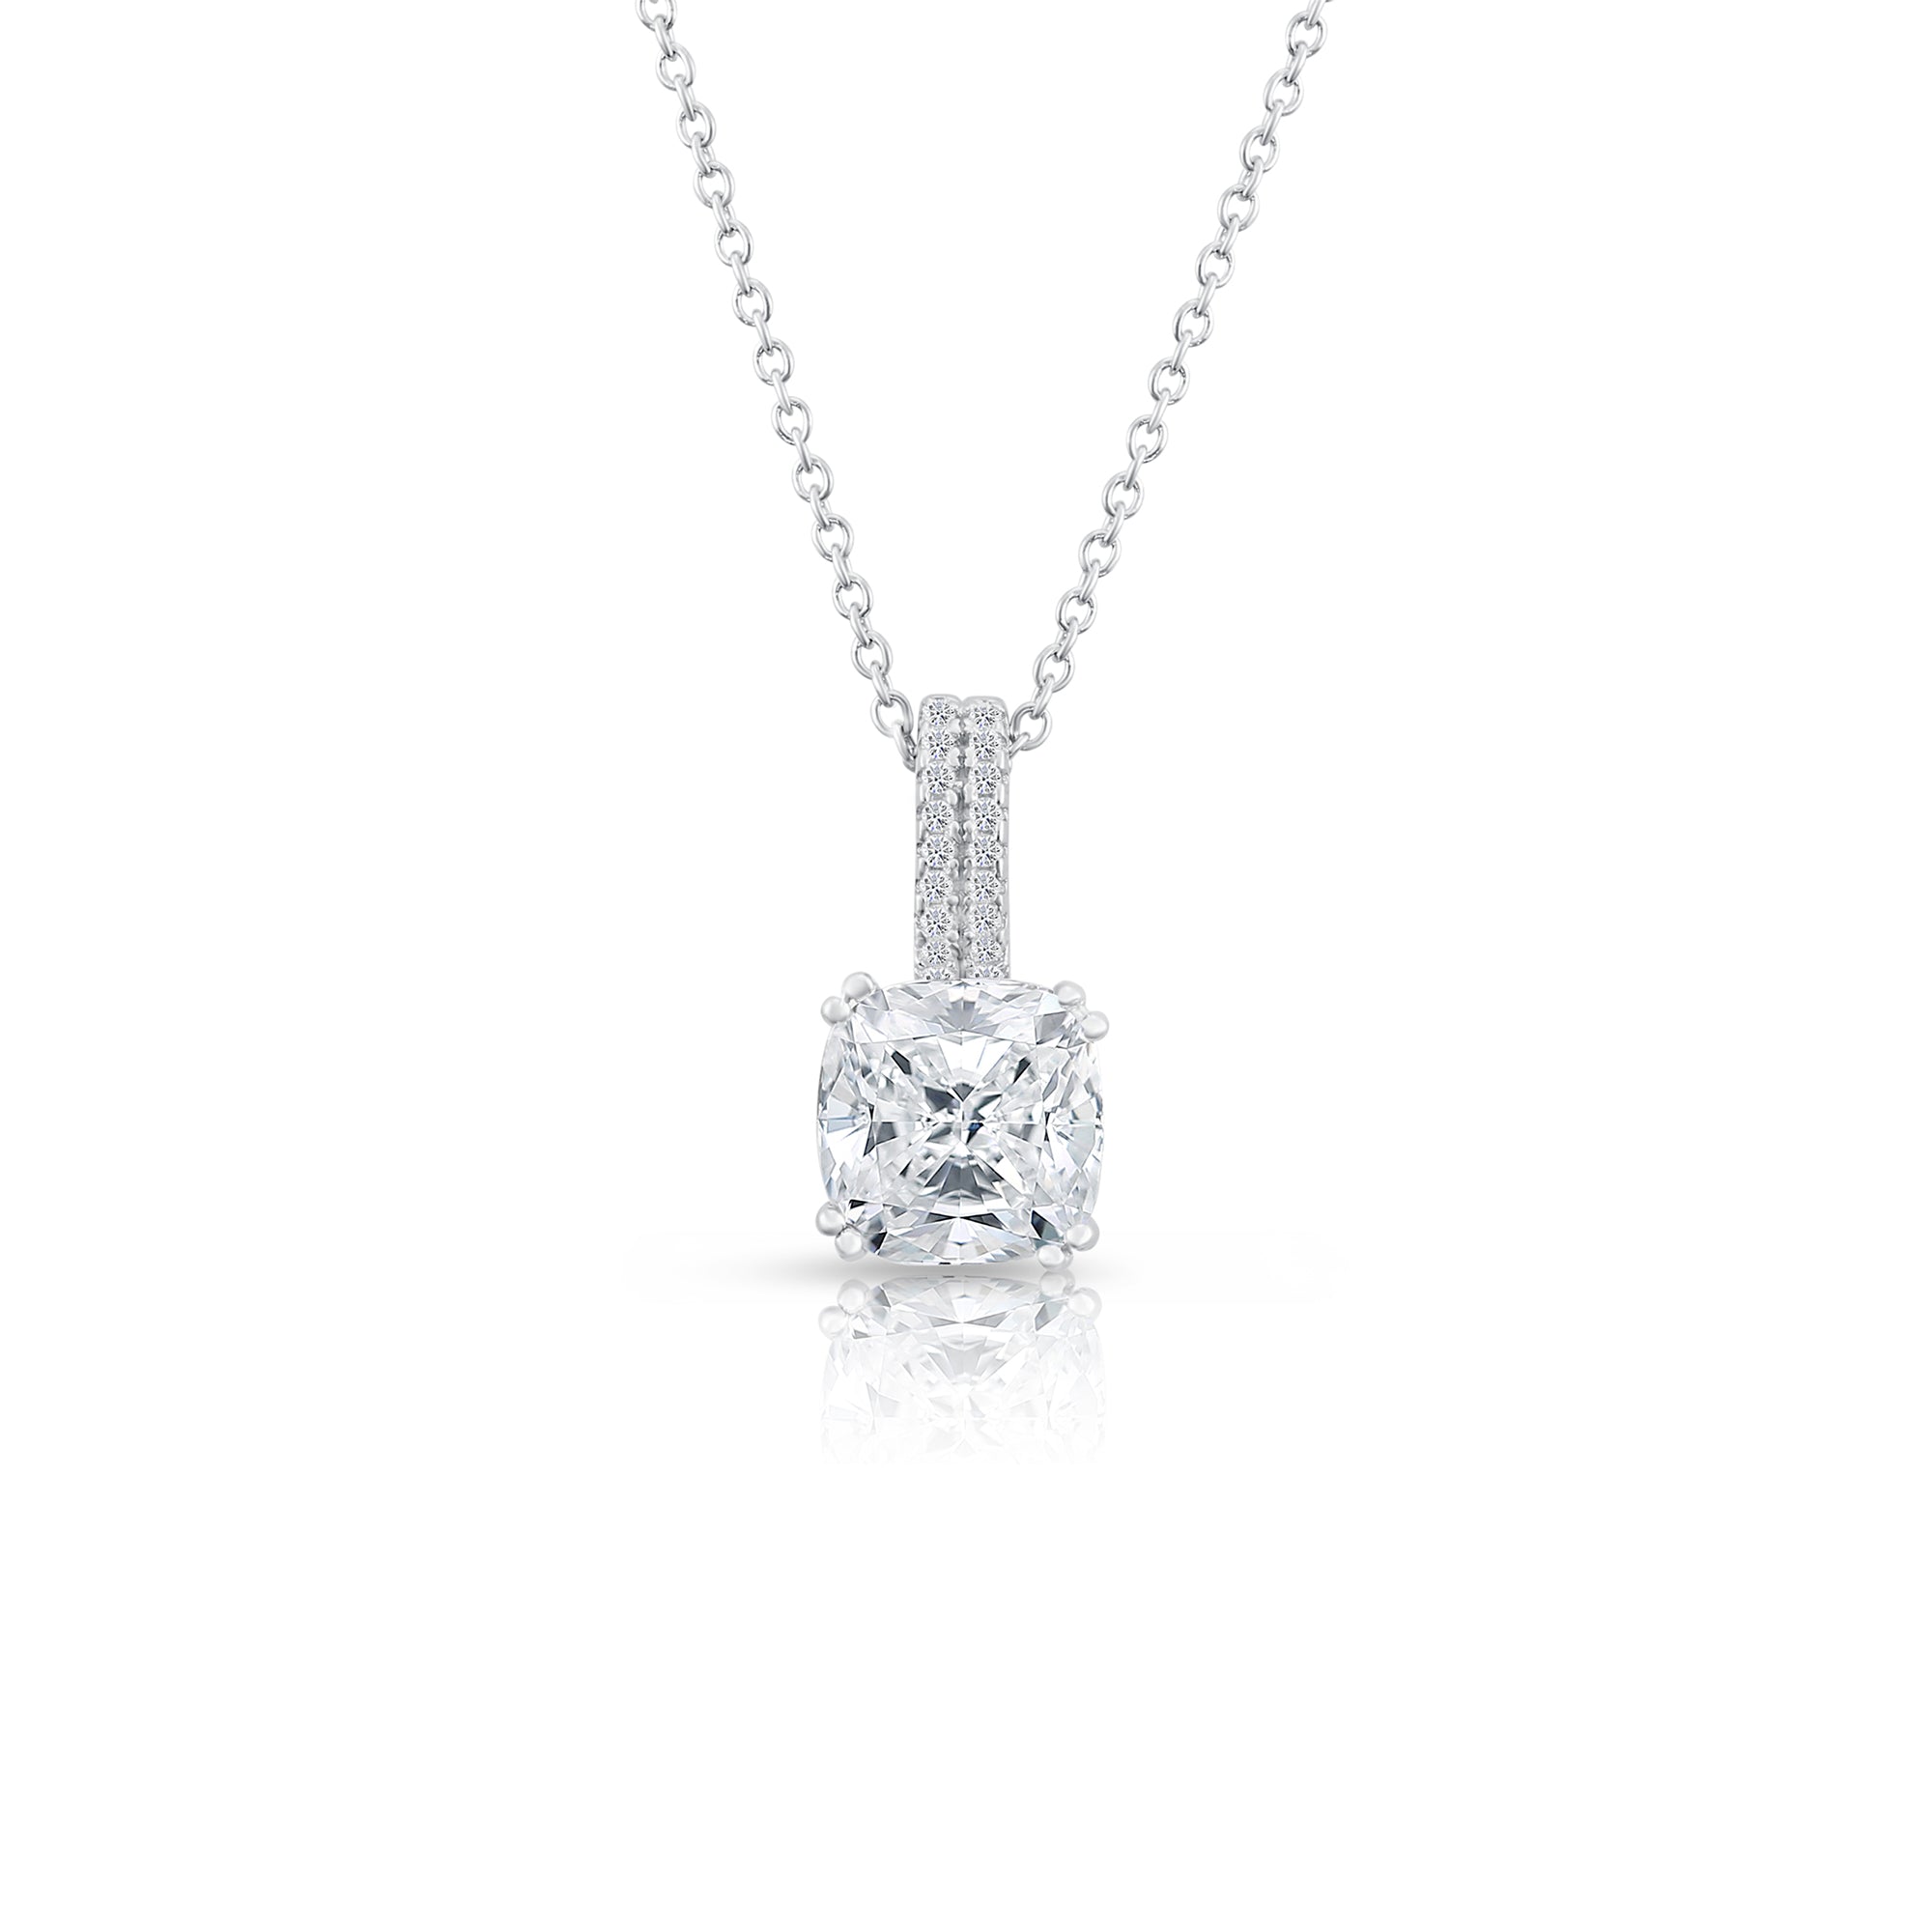 CZ Charm Necklace in Sterling Silver